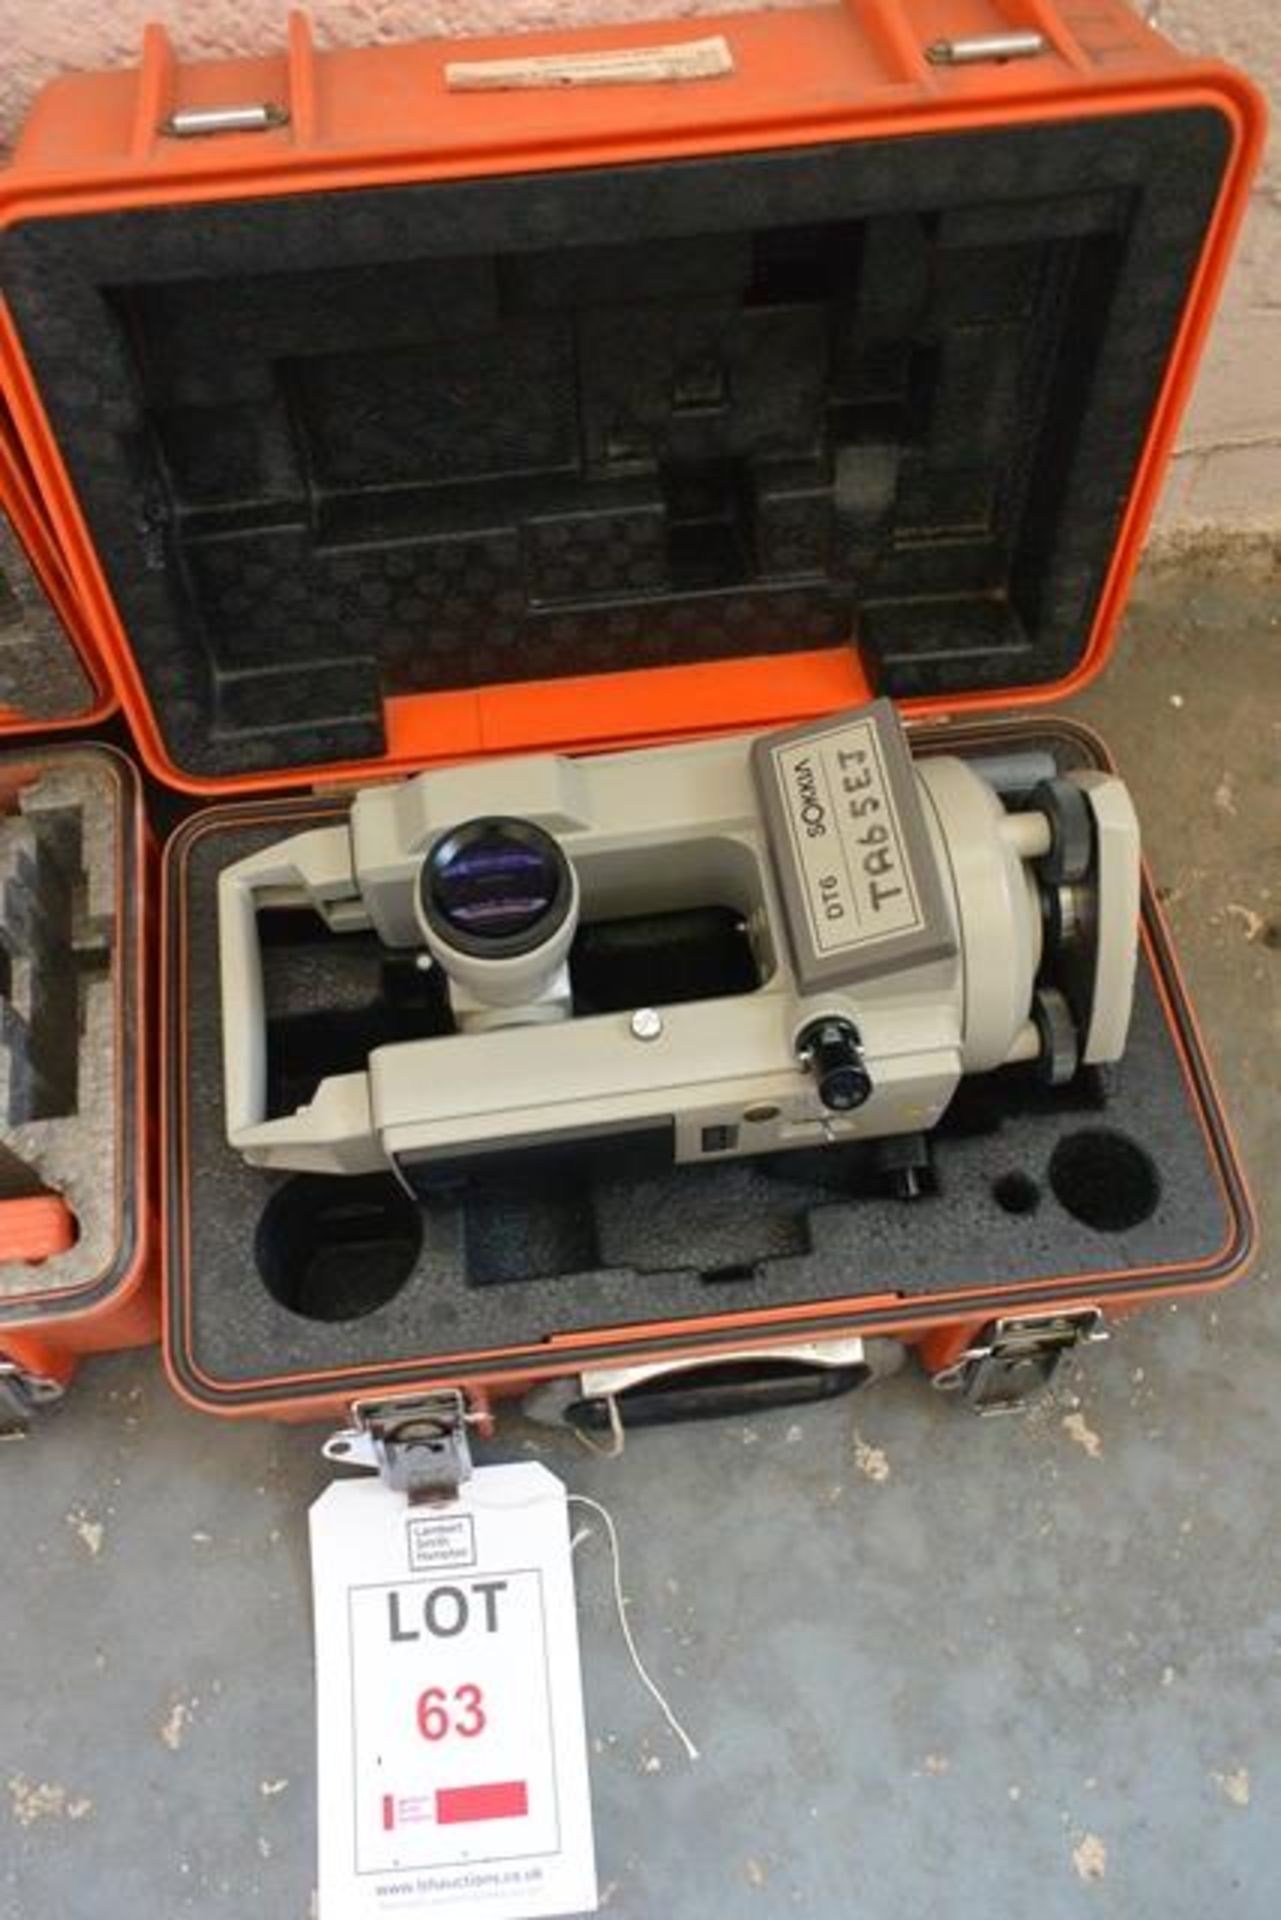 Sokkia DT6 electronic digital theodolite, serial no. D20513 (current calibration status unknown),